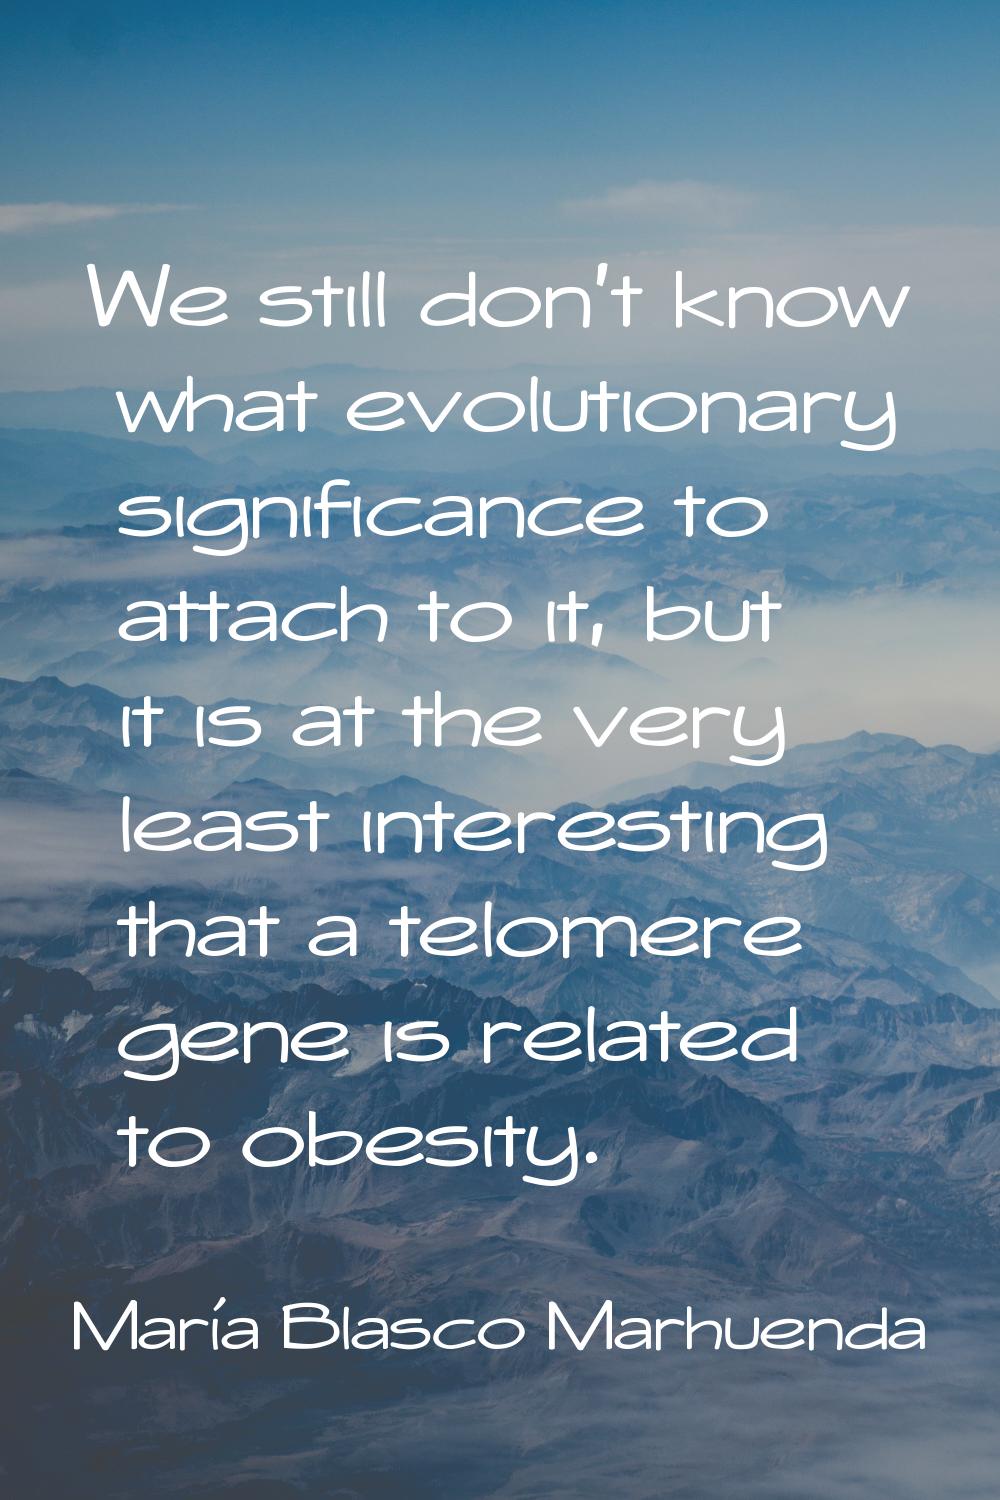 We still don't know what evolutionary significance to attach to it, but it is at the very least int